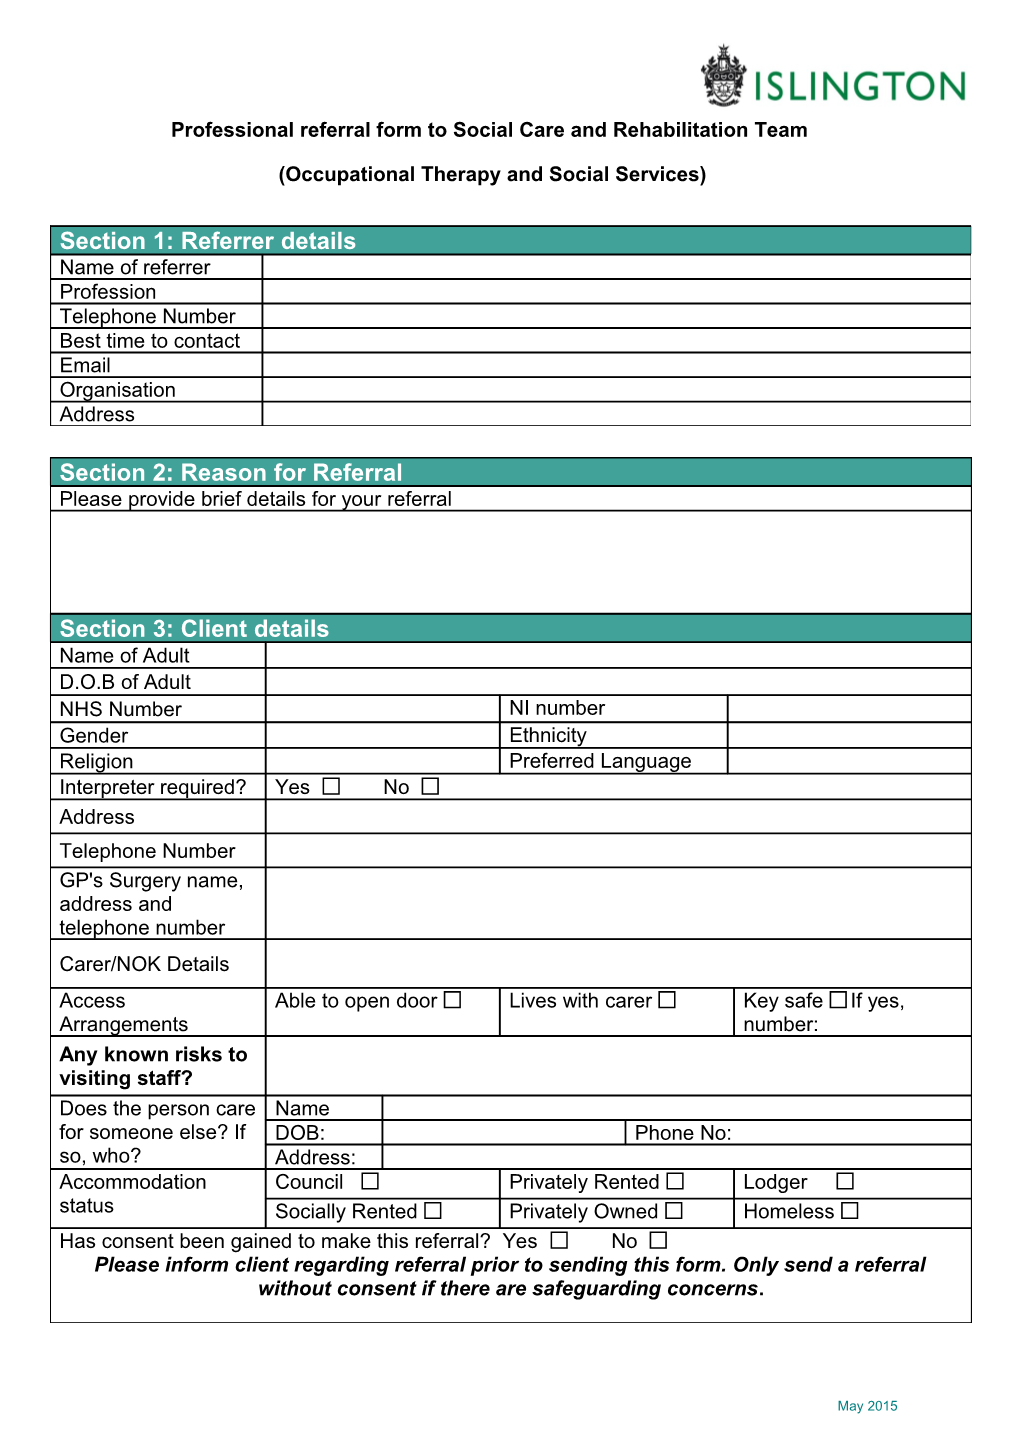 Professional Referral Form to Social Care and Rehabilitation Team